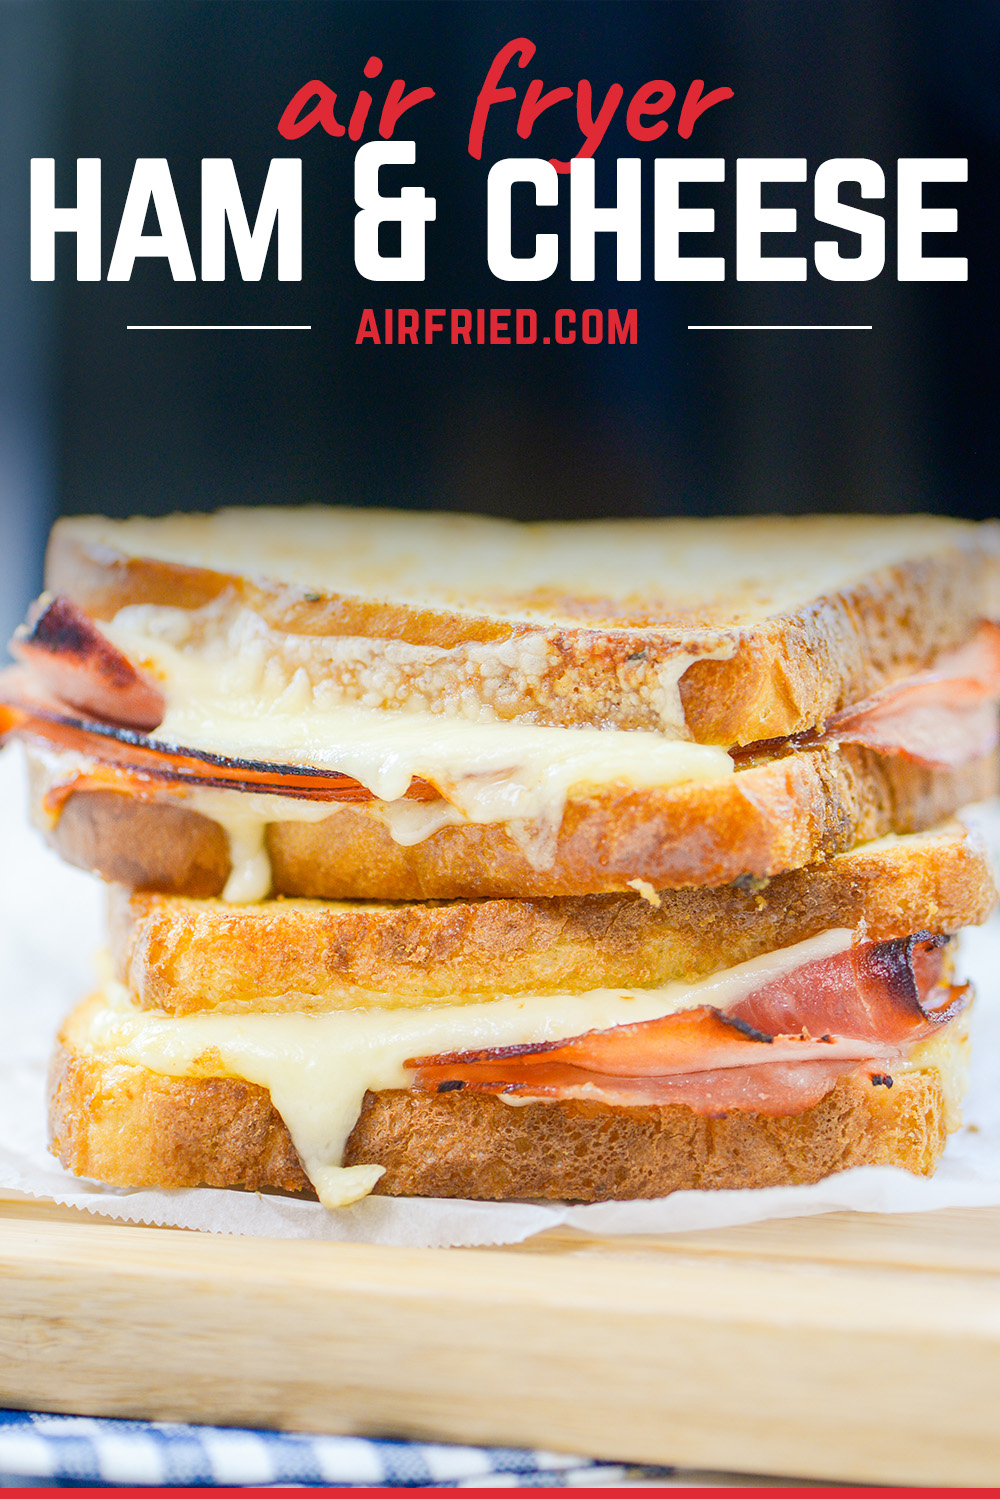 This Air Fryer Hot Ham and Cheese Sandwich is crispy and buttery on the outside and loaded with melty cheese, deli ham, and a creamy sauce on the inside! This sandwich makes the perfect lunch.